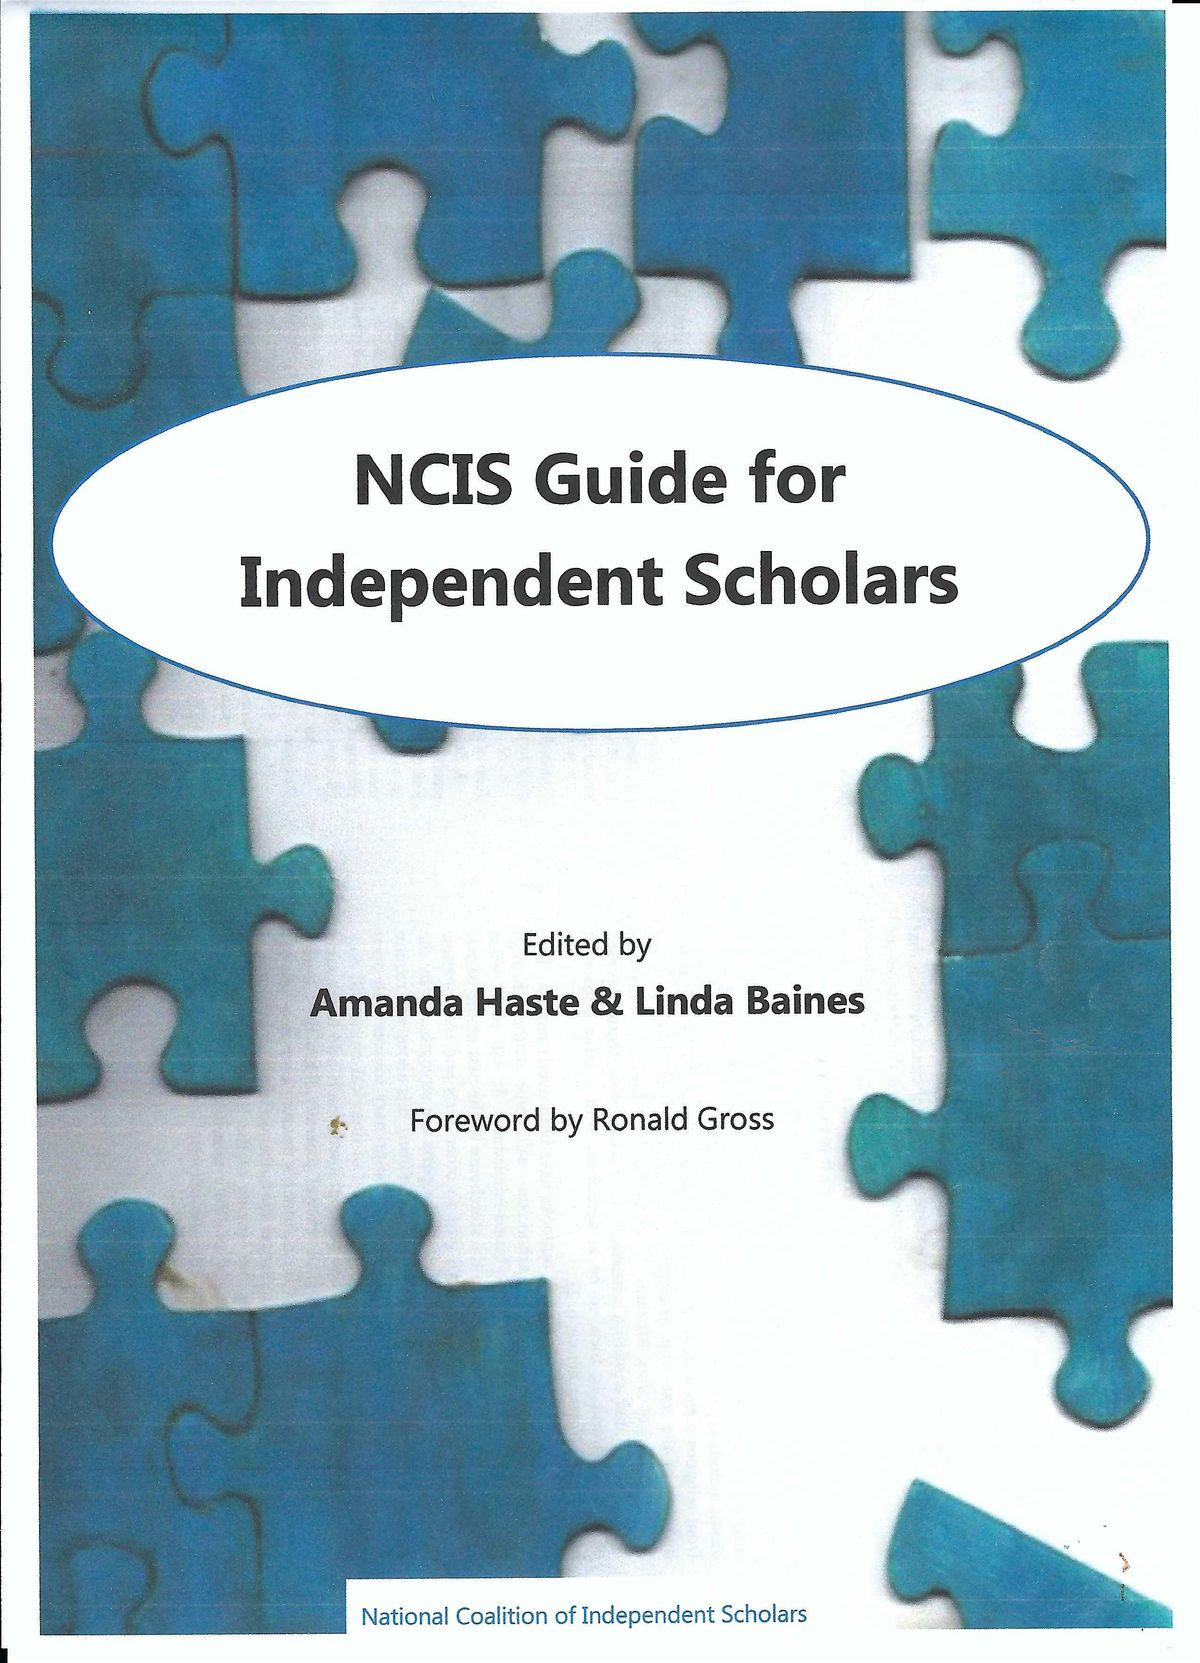 NCIS Guide for Independent Scholars - book launch